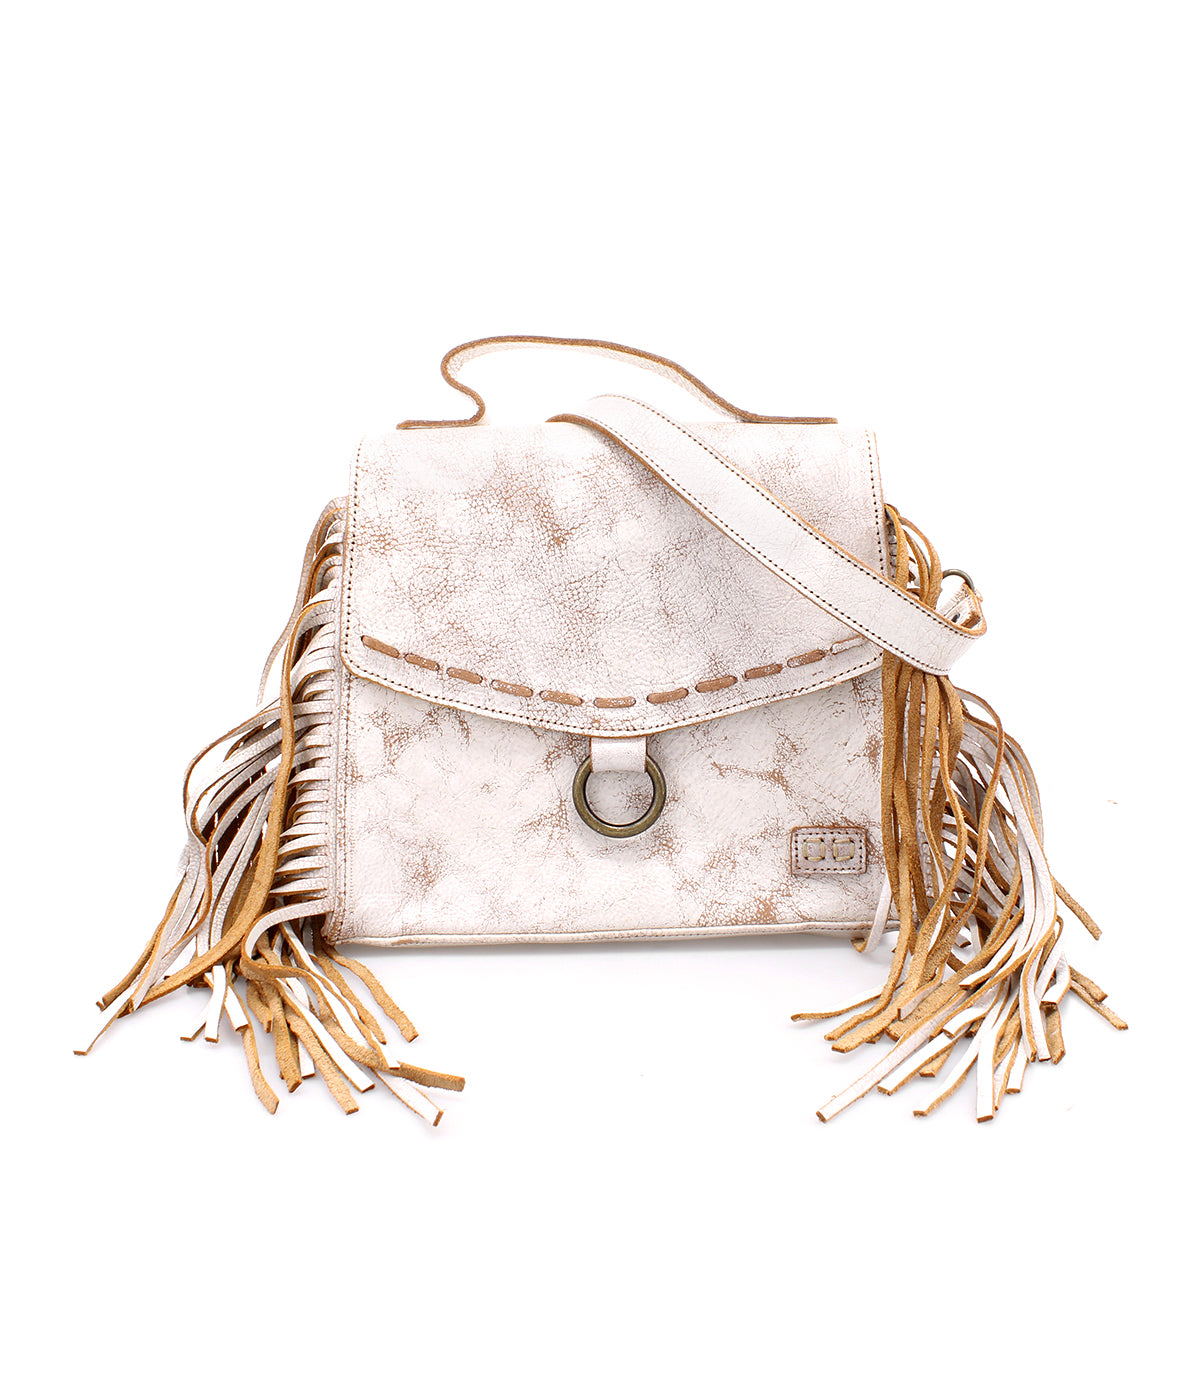 A Bed Stu Hidden white leather crossbody bag with fringes and tan handles.